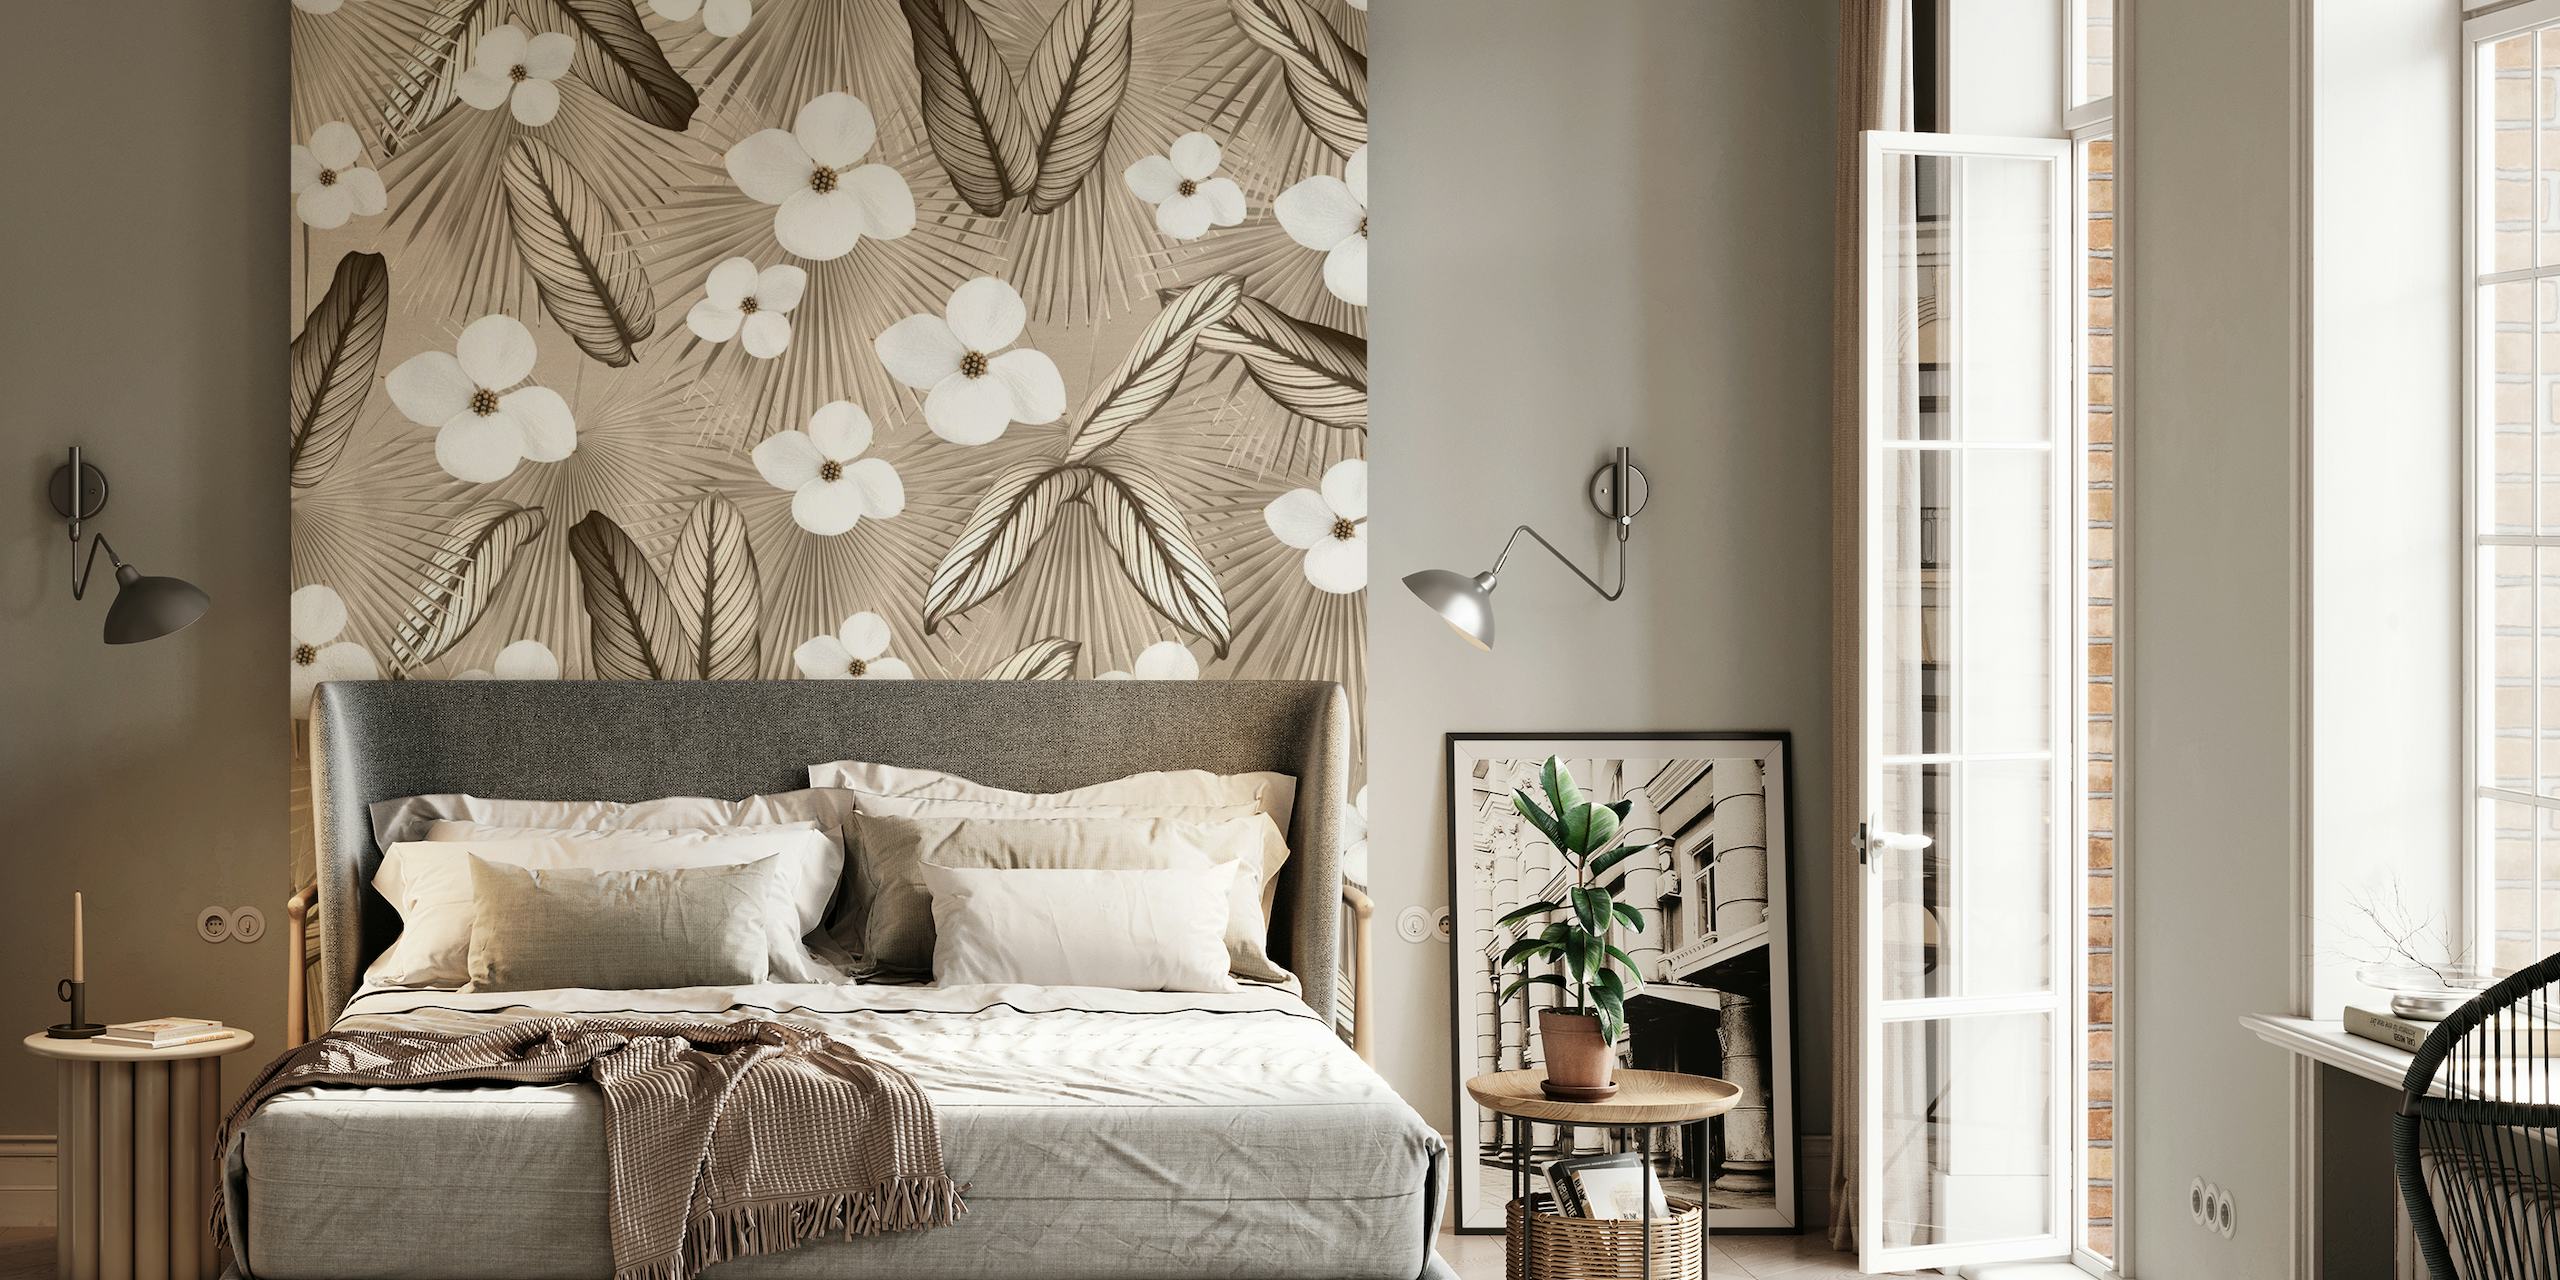 Calathea Fan Palm and white floral wall mural on a taupe background